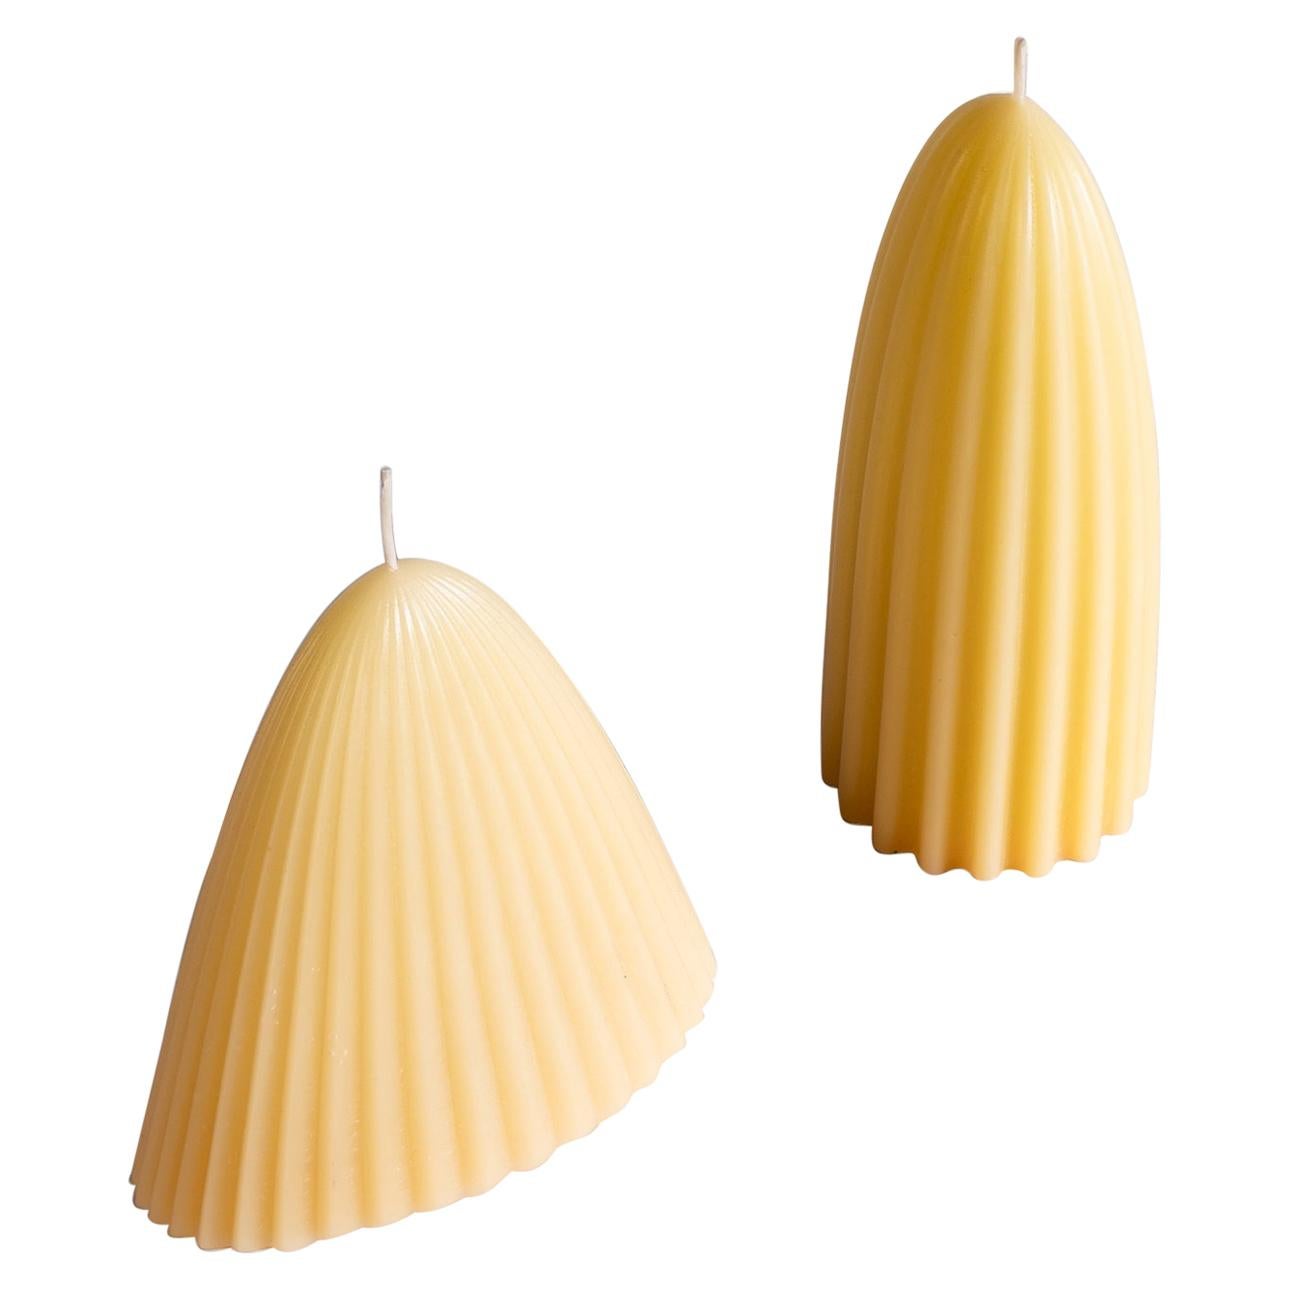 Tusk Candle, Set of Two, Natural Beeswax